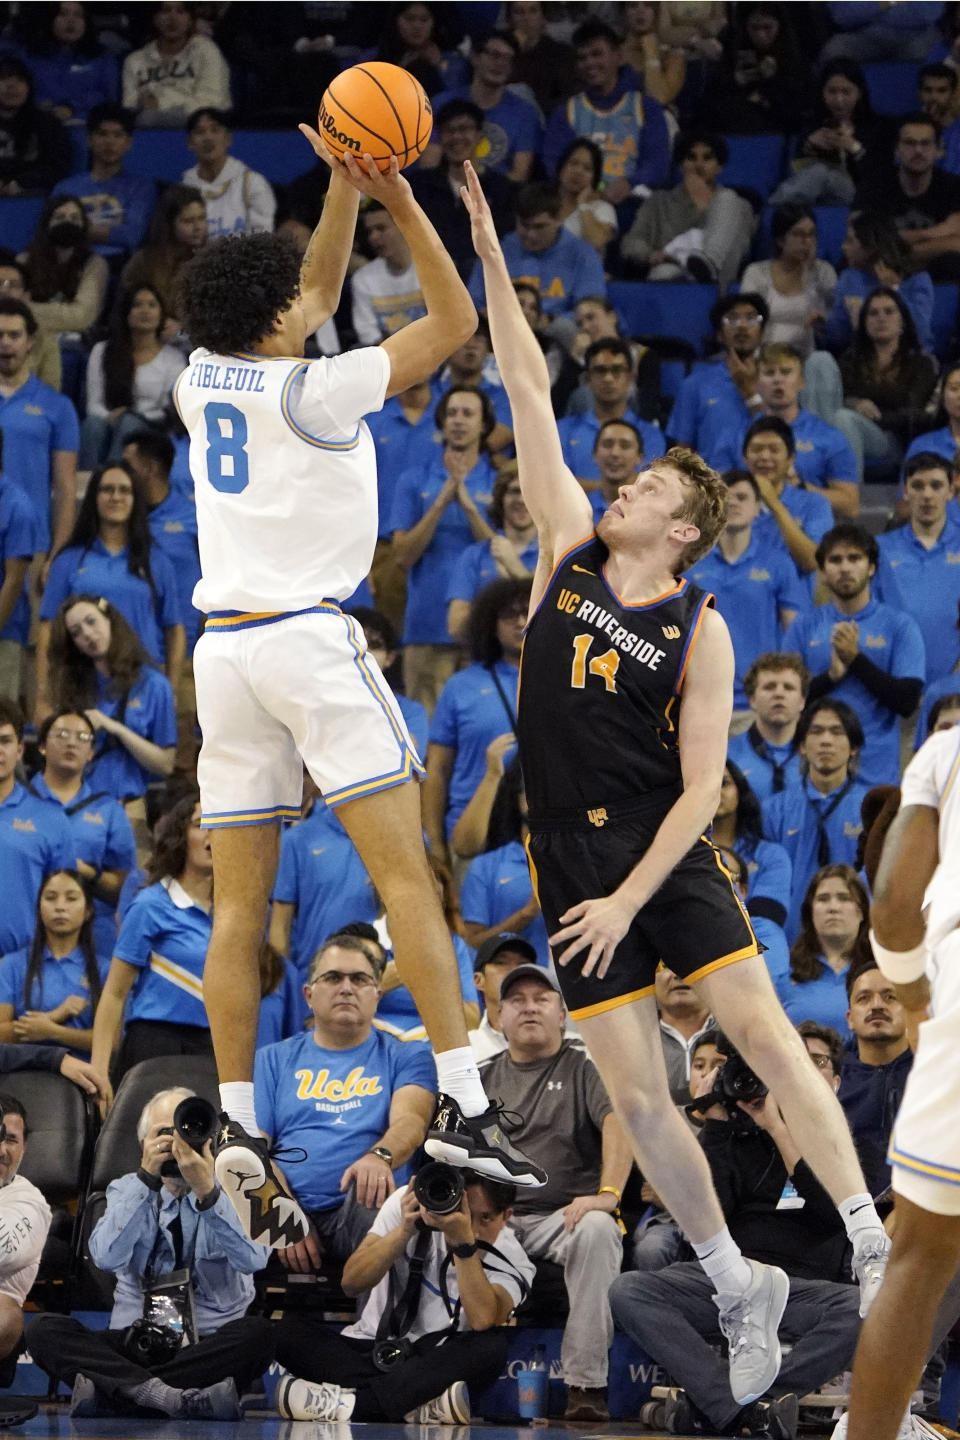 UCLA guard Ilane Fibleuil, left, shoots as UC Riverside forward Wil Tattersall defends during the first half of an NCAA college basketball game Thursday, Nov. 30, 2023, in Los Angeles. (AP Photo/Mark J. Terrill)